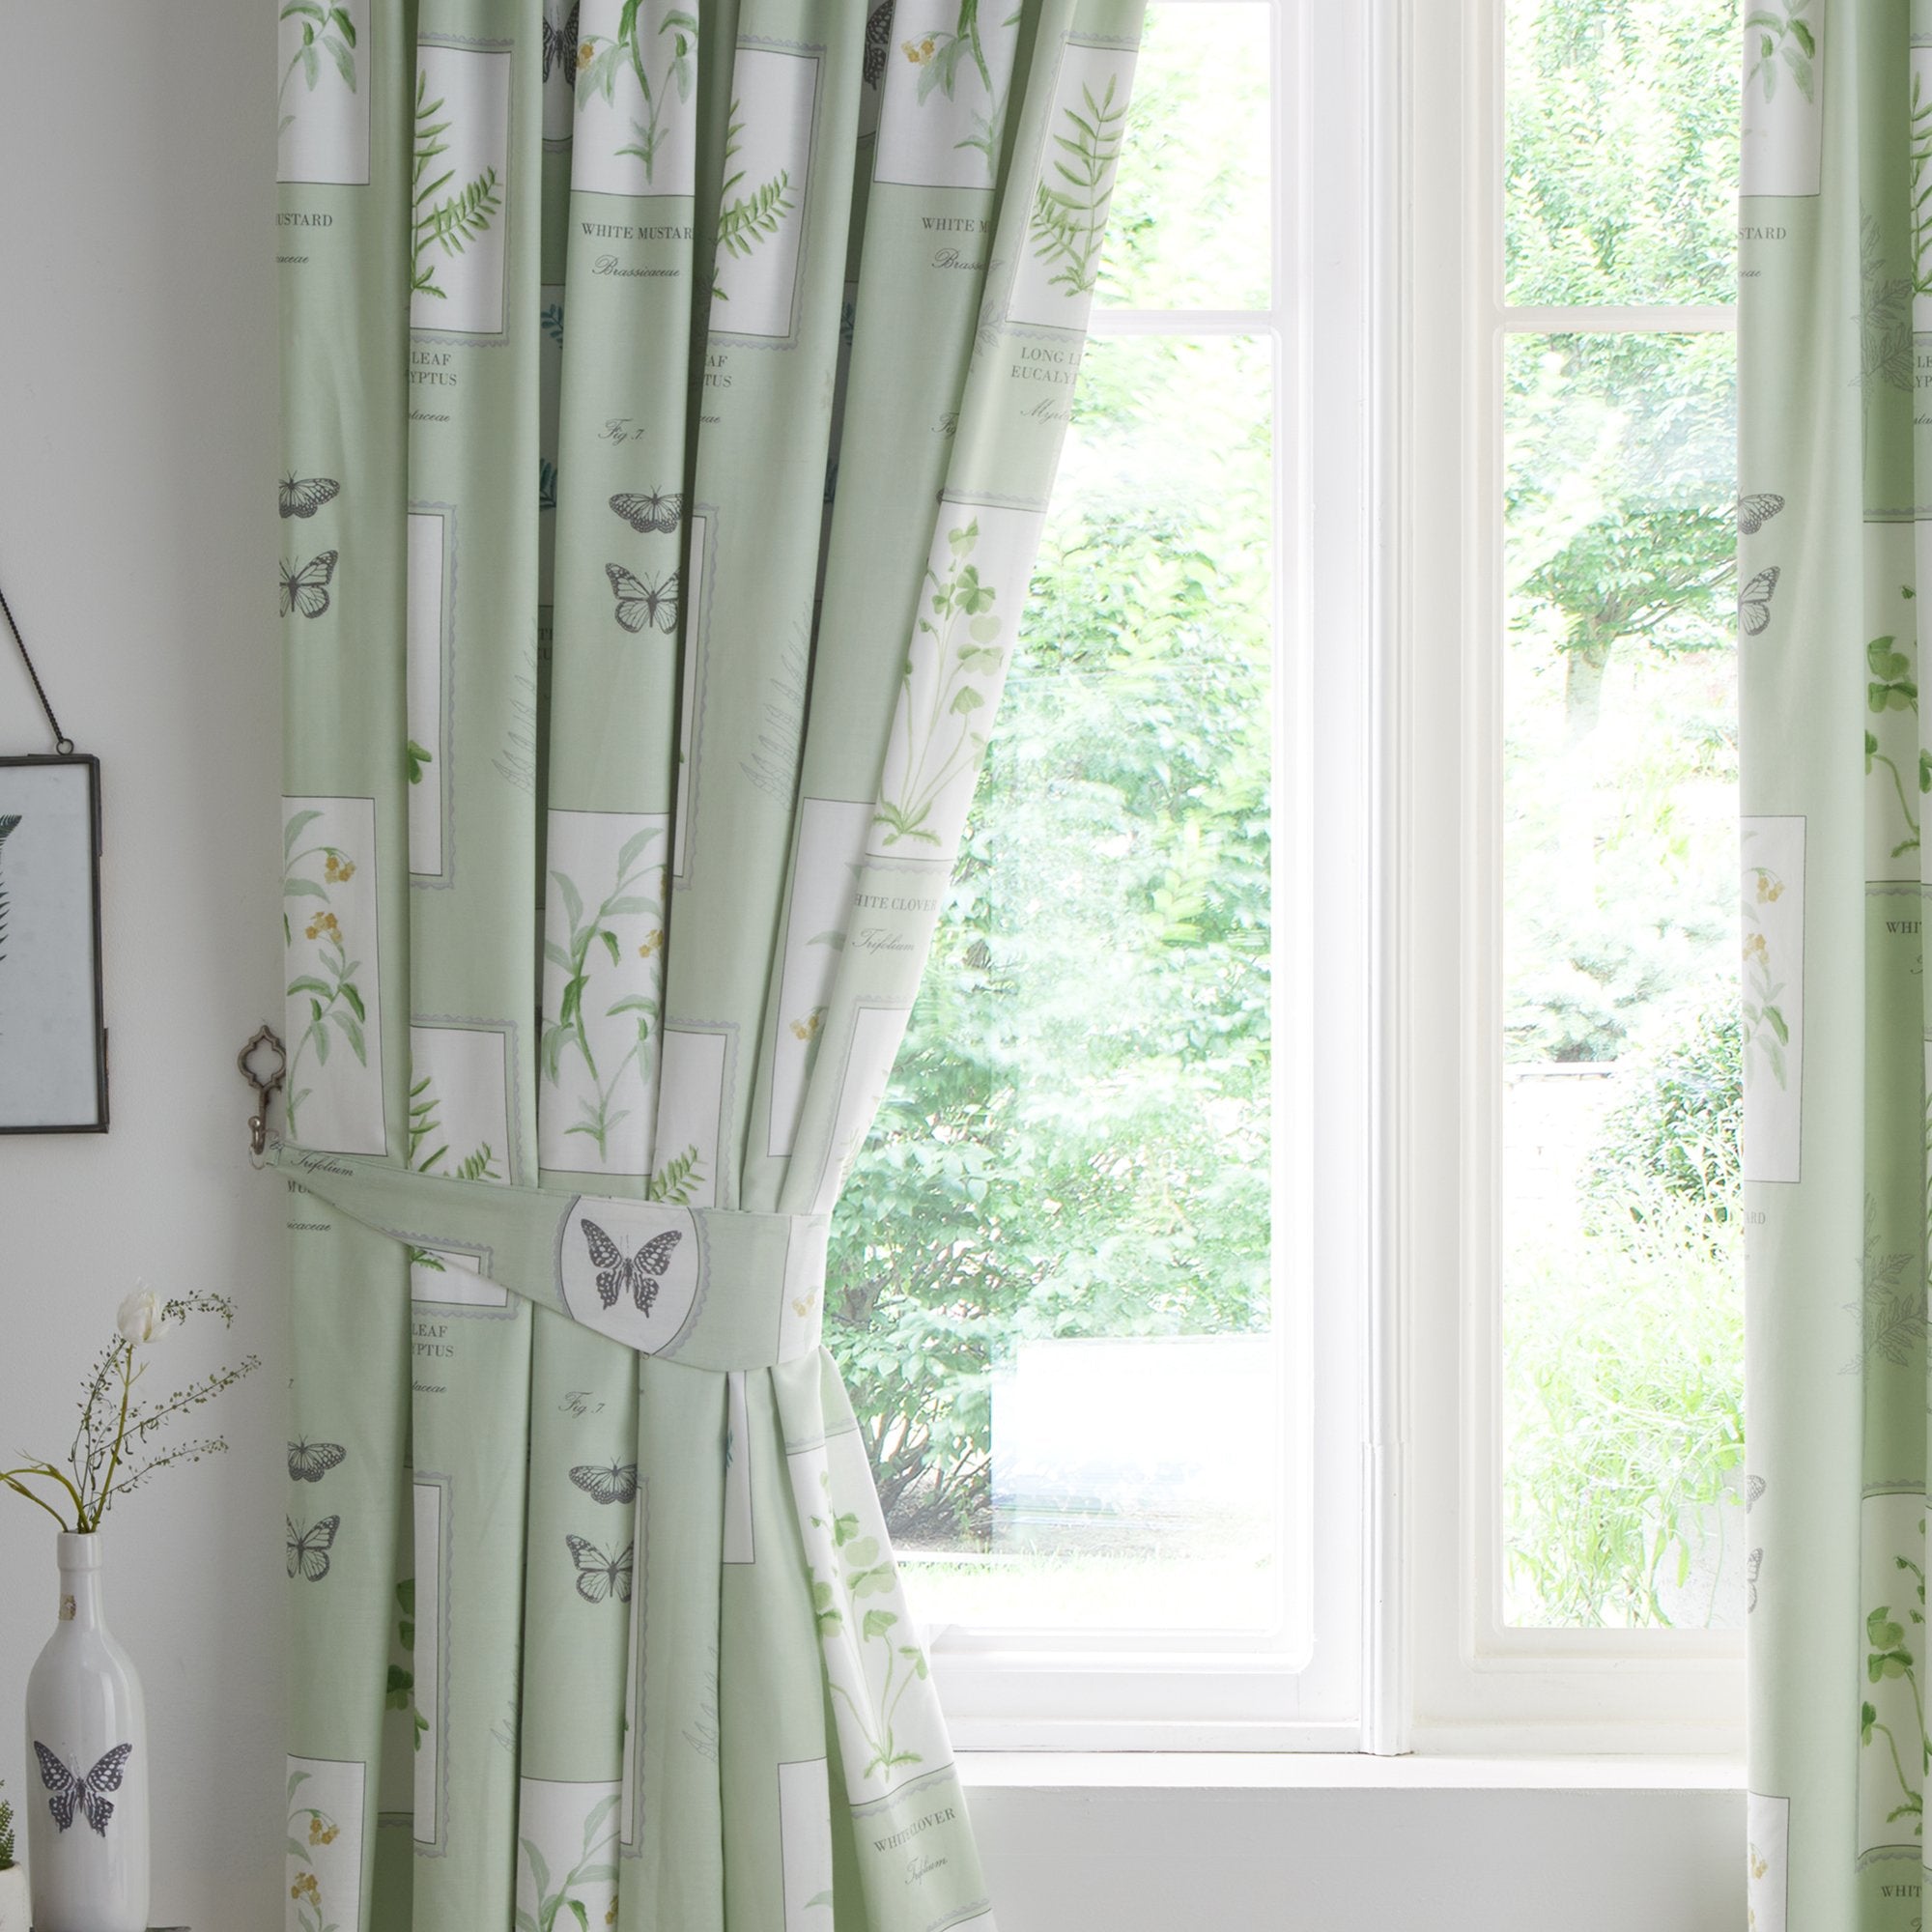 Pair of Pencil Pleat Curtains With Tie-Backs Floral Garden by Dreams & Drapes Design in Green